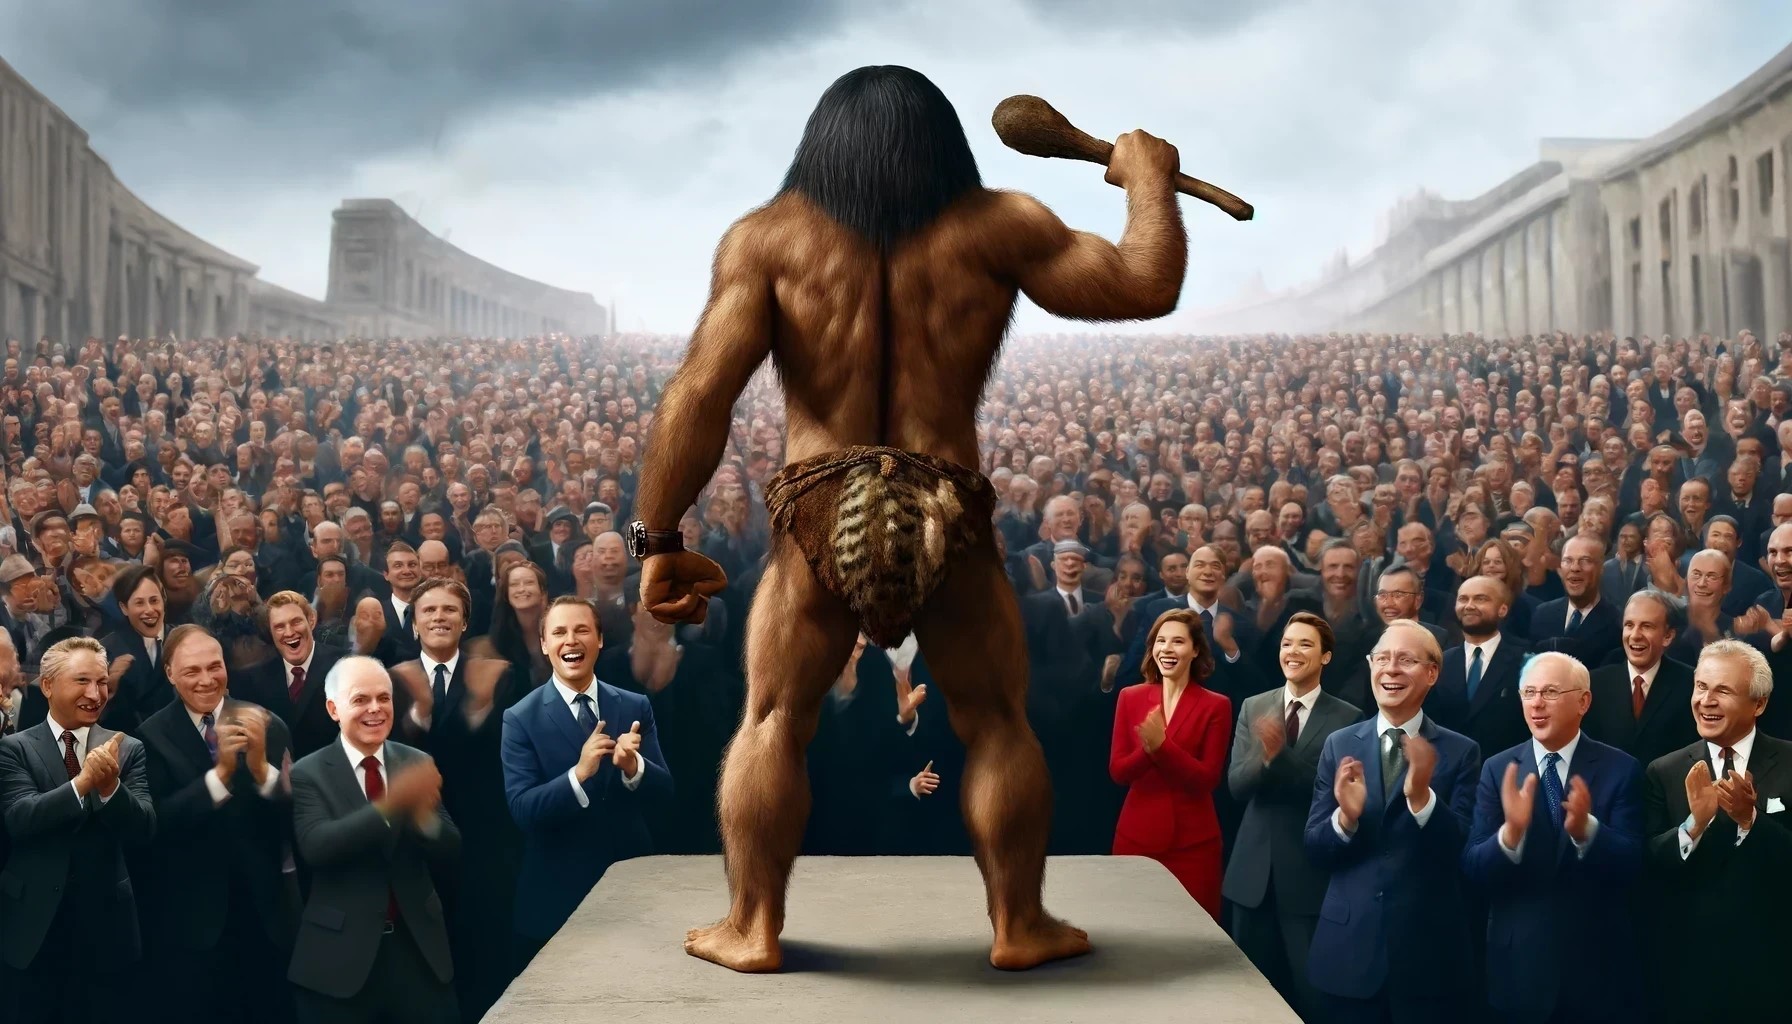 A caveman politician with his distinguished fans (By DALL-E, inspired by Pierre Lemieux)